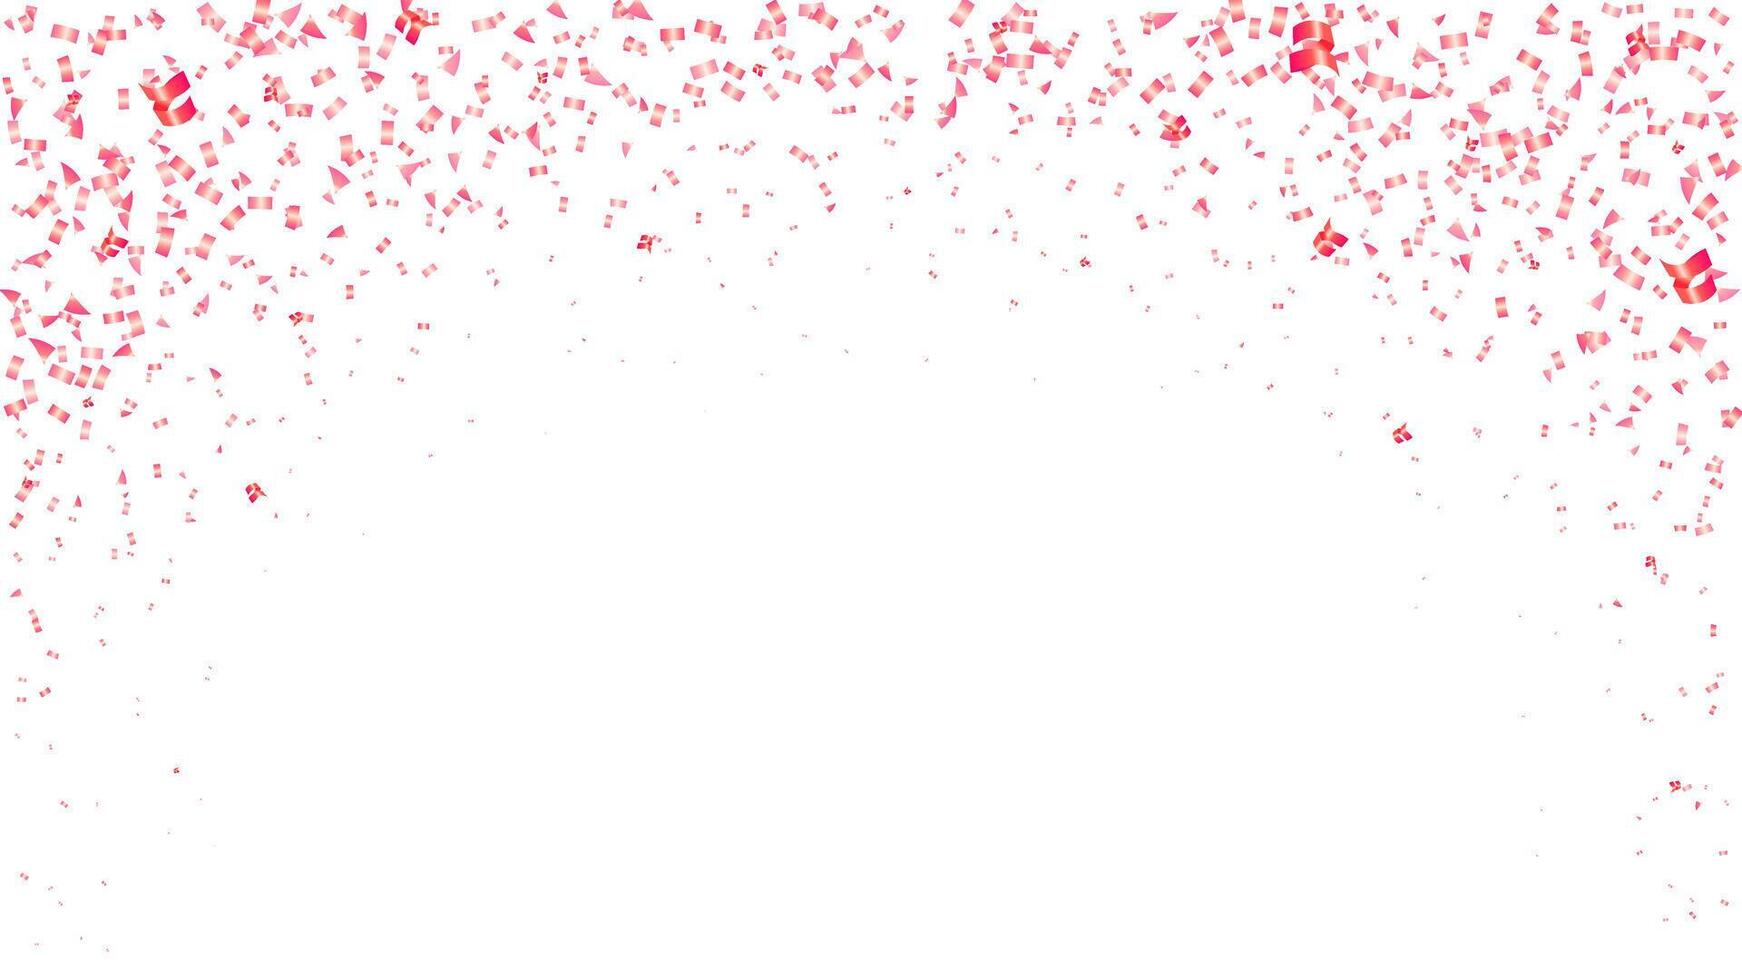 Pink confetti falling celebration, event, birthday, Valentine party background vector